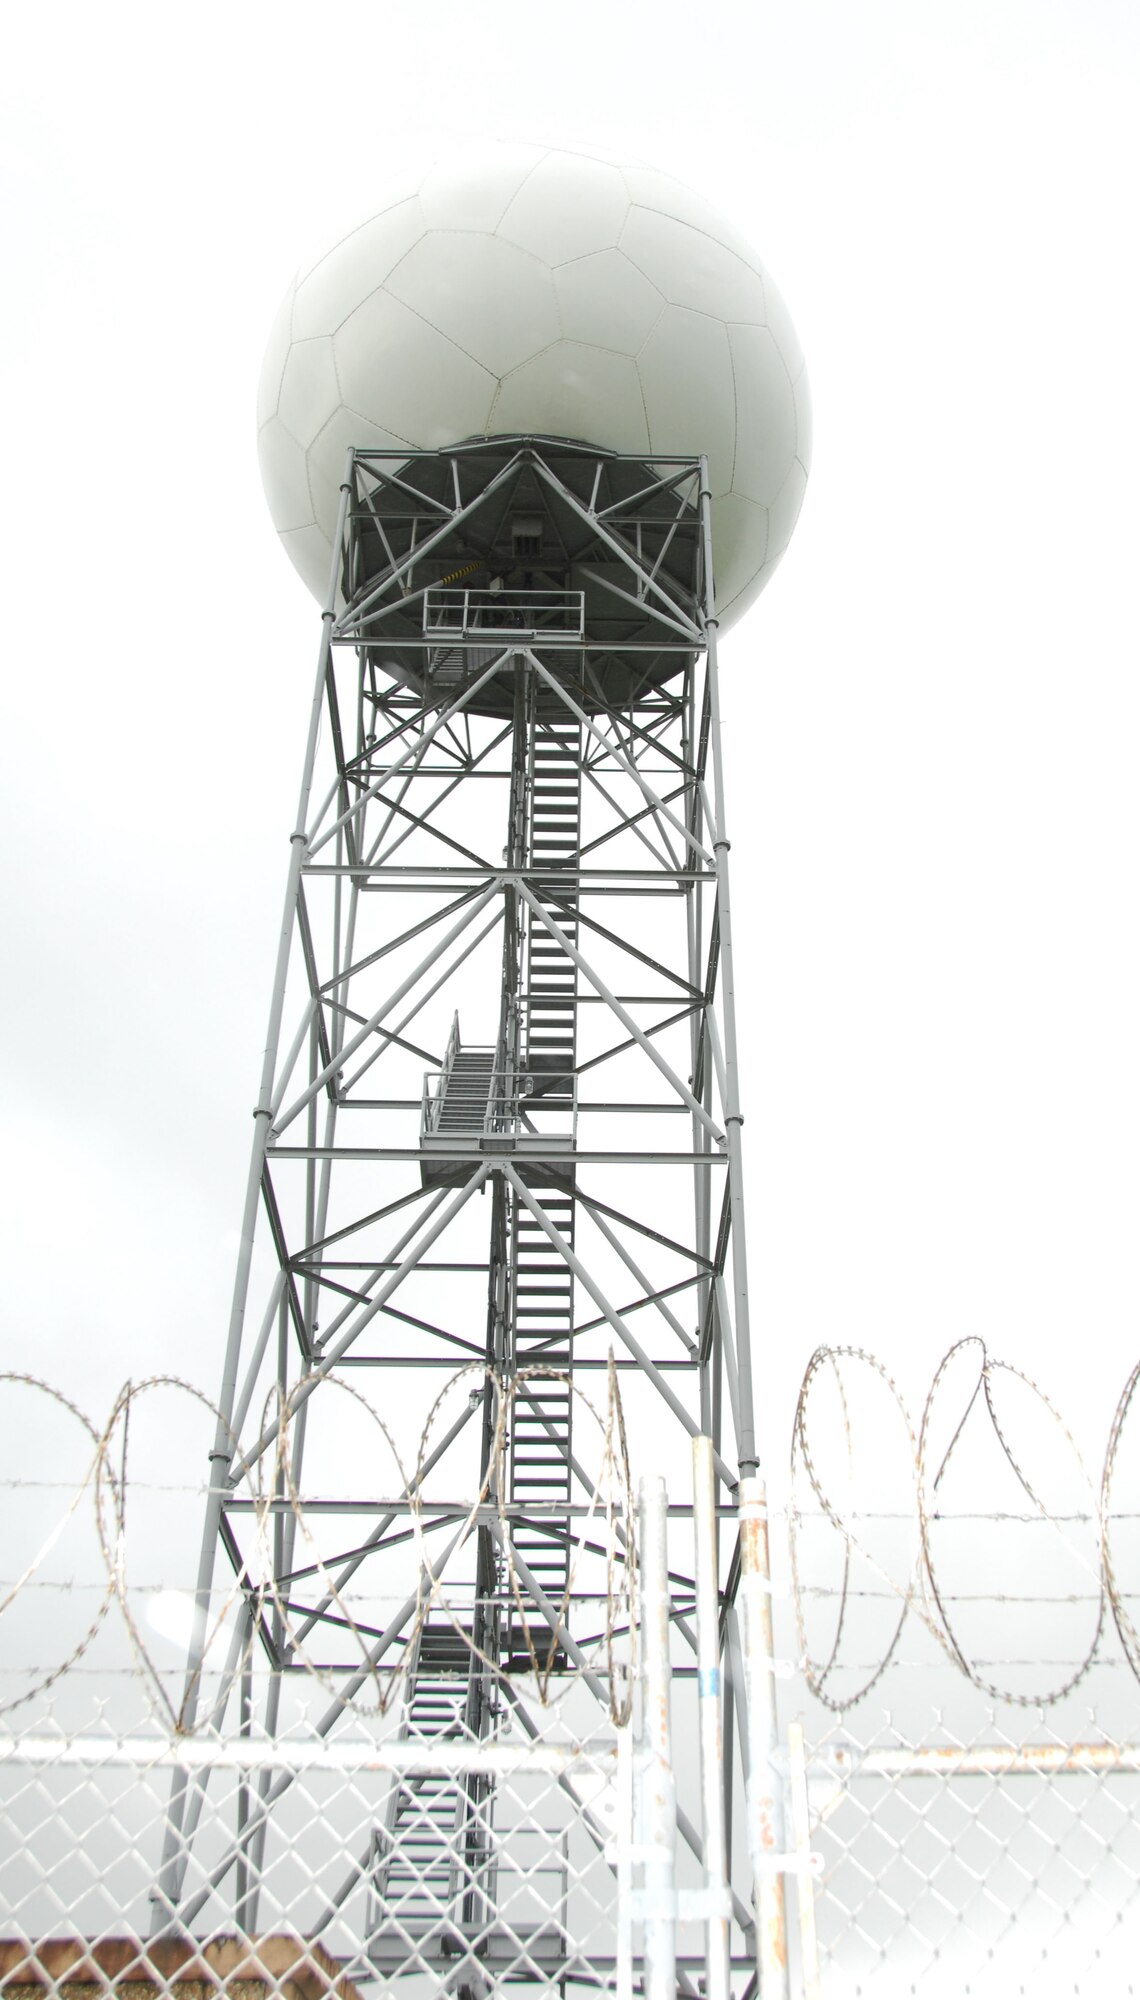 ANDERSEN AIR FORCE BASE, Guam ? This NEXRAD weather radar provides data for the 36th Operations Support Squadron, the Federal Aviation Administration and the National Weather Service. Members of the 36th Communications Squadron ground radar systems flight provide maintenance support for the radar. (U.S. Air Force photo by Senior Airman Shane Dunaway)